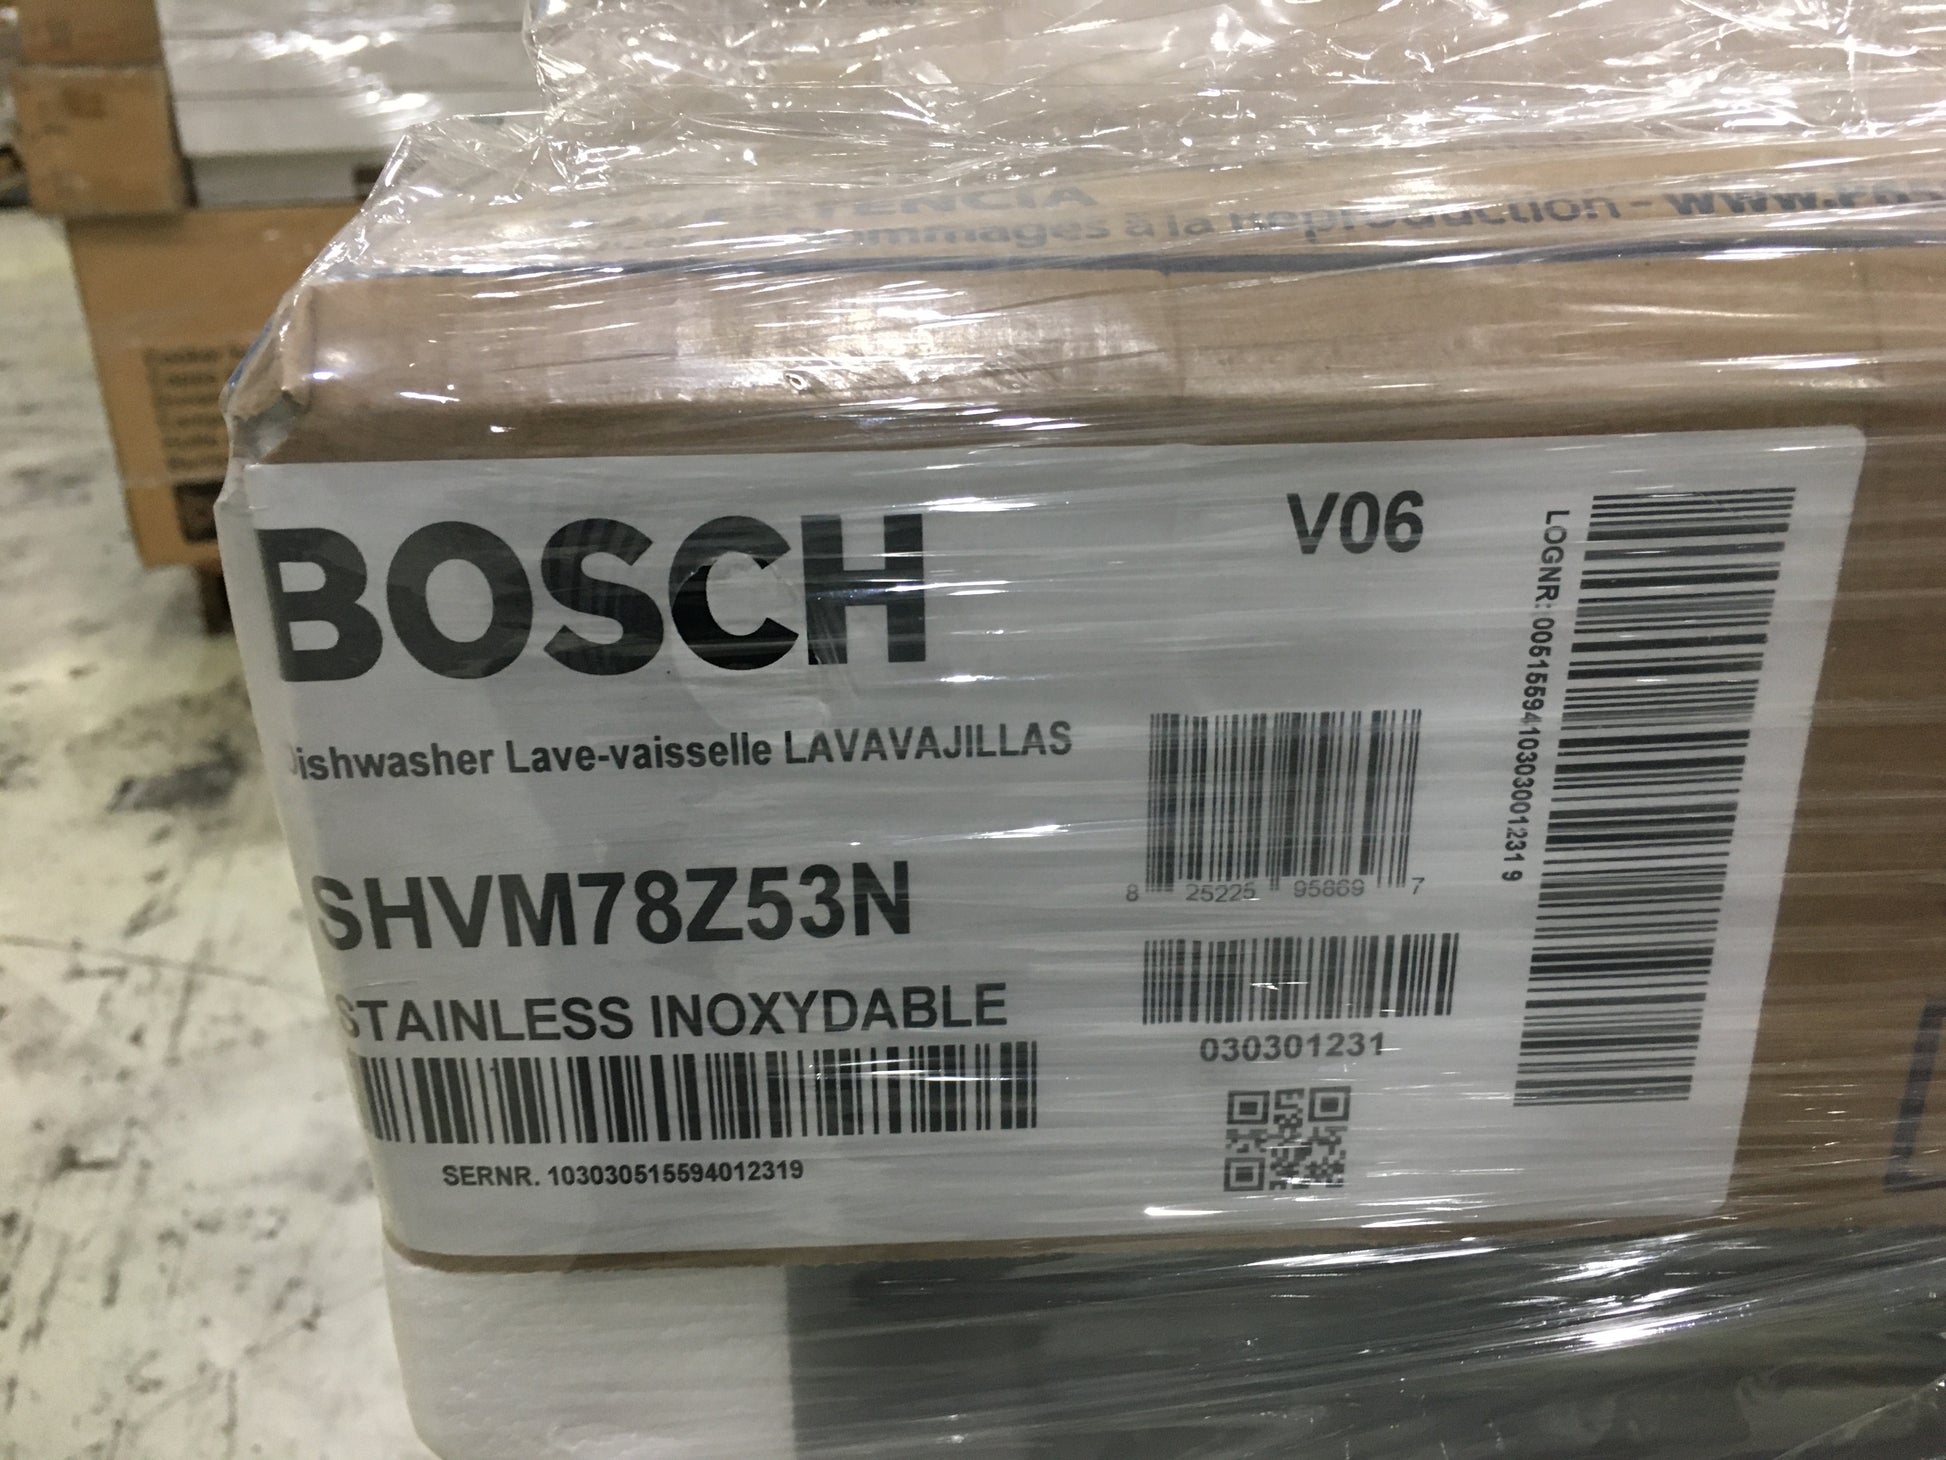 BOSCH 800 SERIES 23 9/16" 16 PLACE SETTING DISHWASHER IN CUSTOM PANEL, VOLTS: 120, HERTZ: 60, LESS FACEPLATE